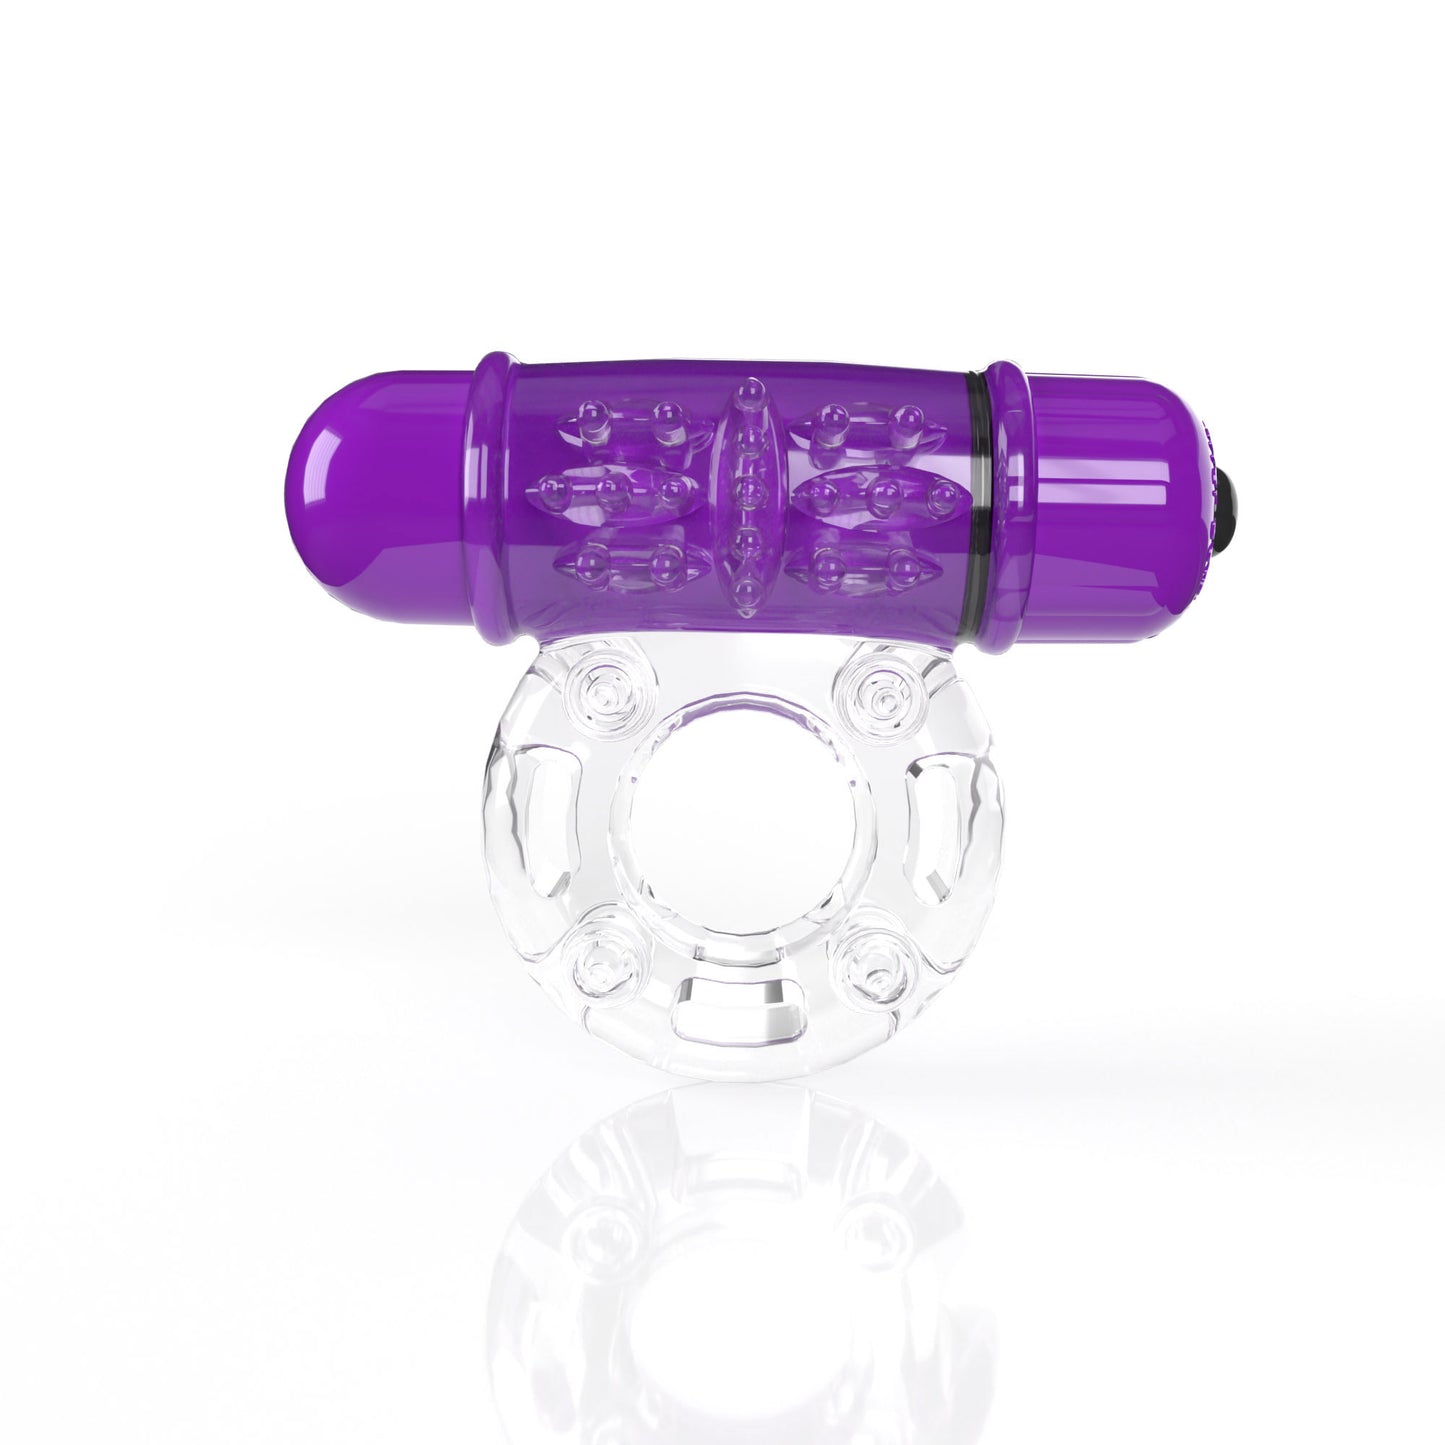 Screaming O 4t - Owow Super Powered Vibrating Ring - Grape